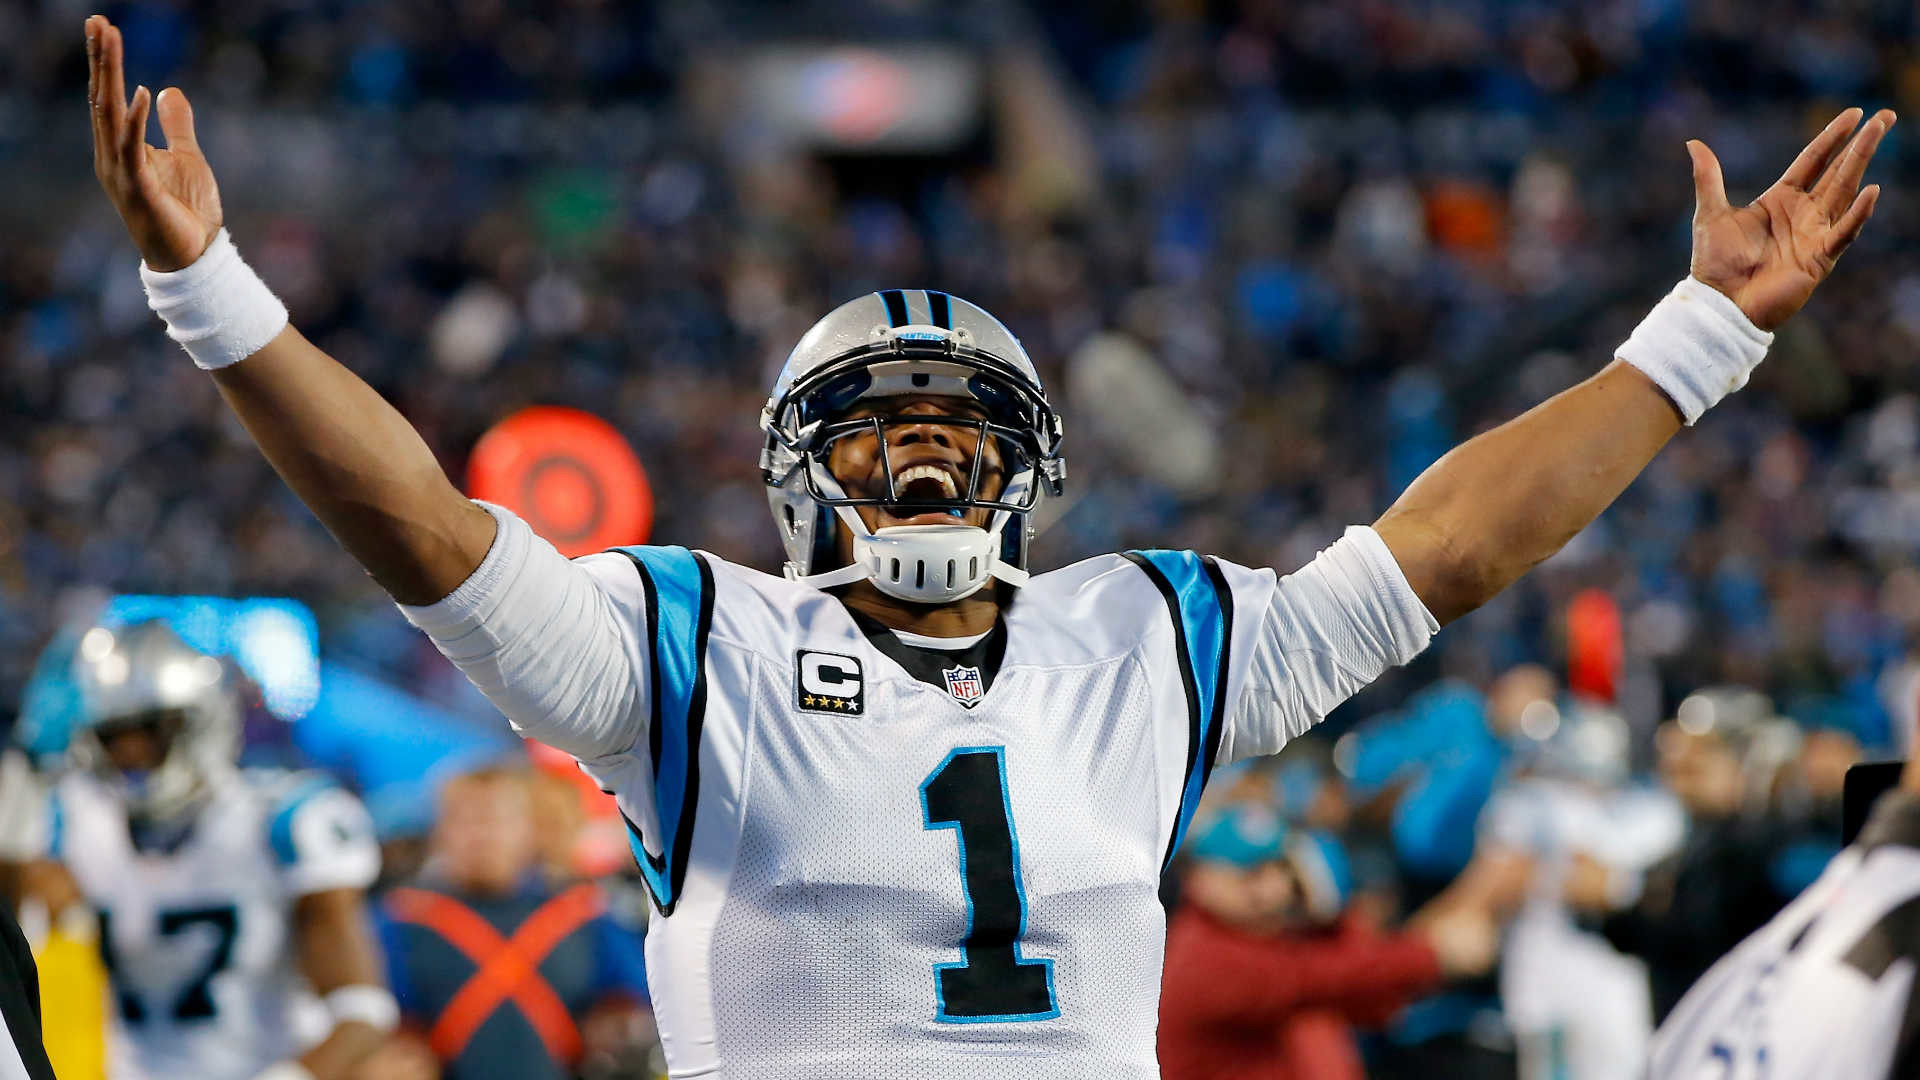 1920x1080 'Superman' Cam Newton is flying high and having fun